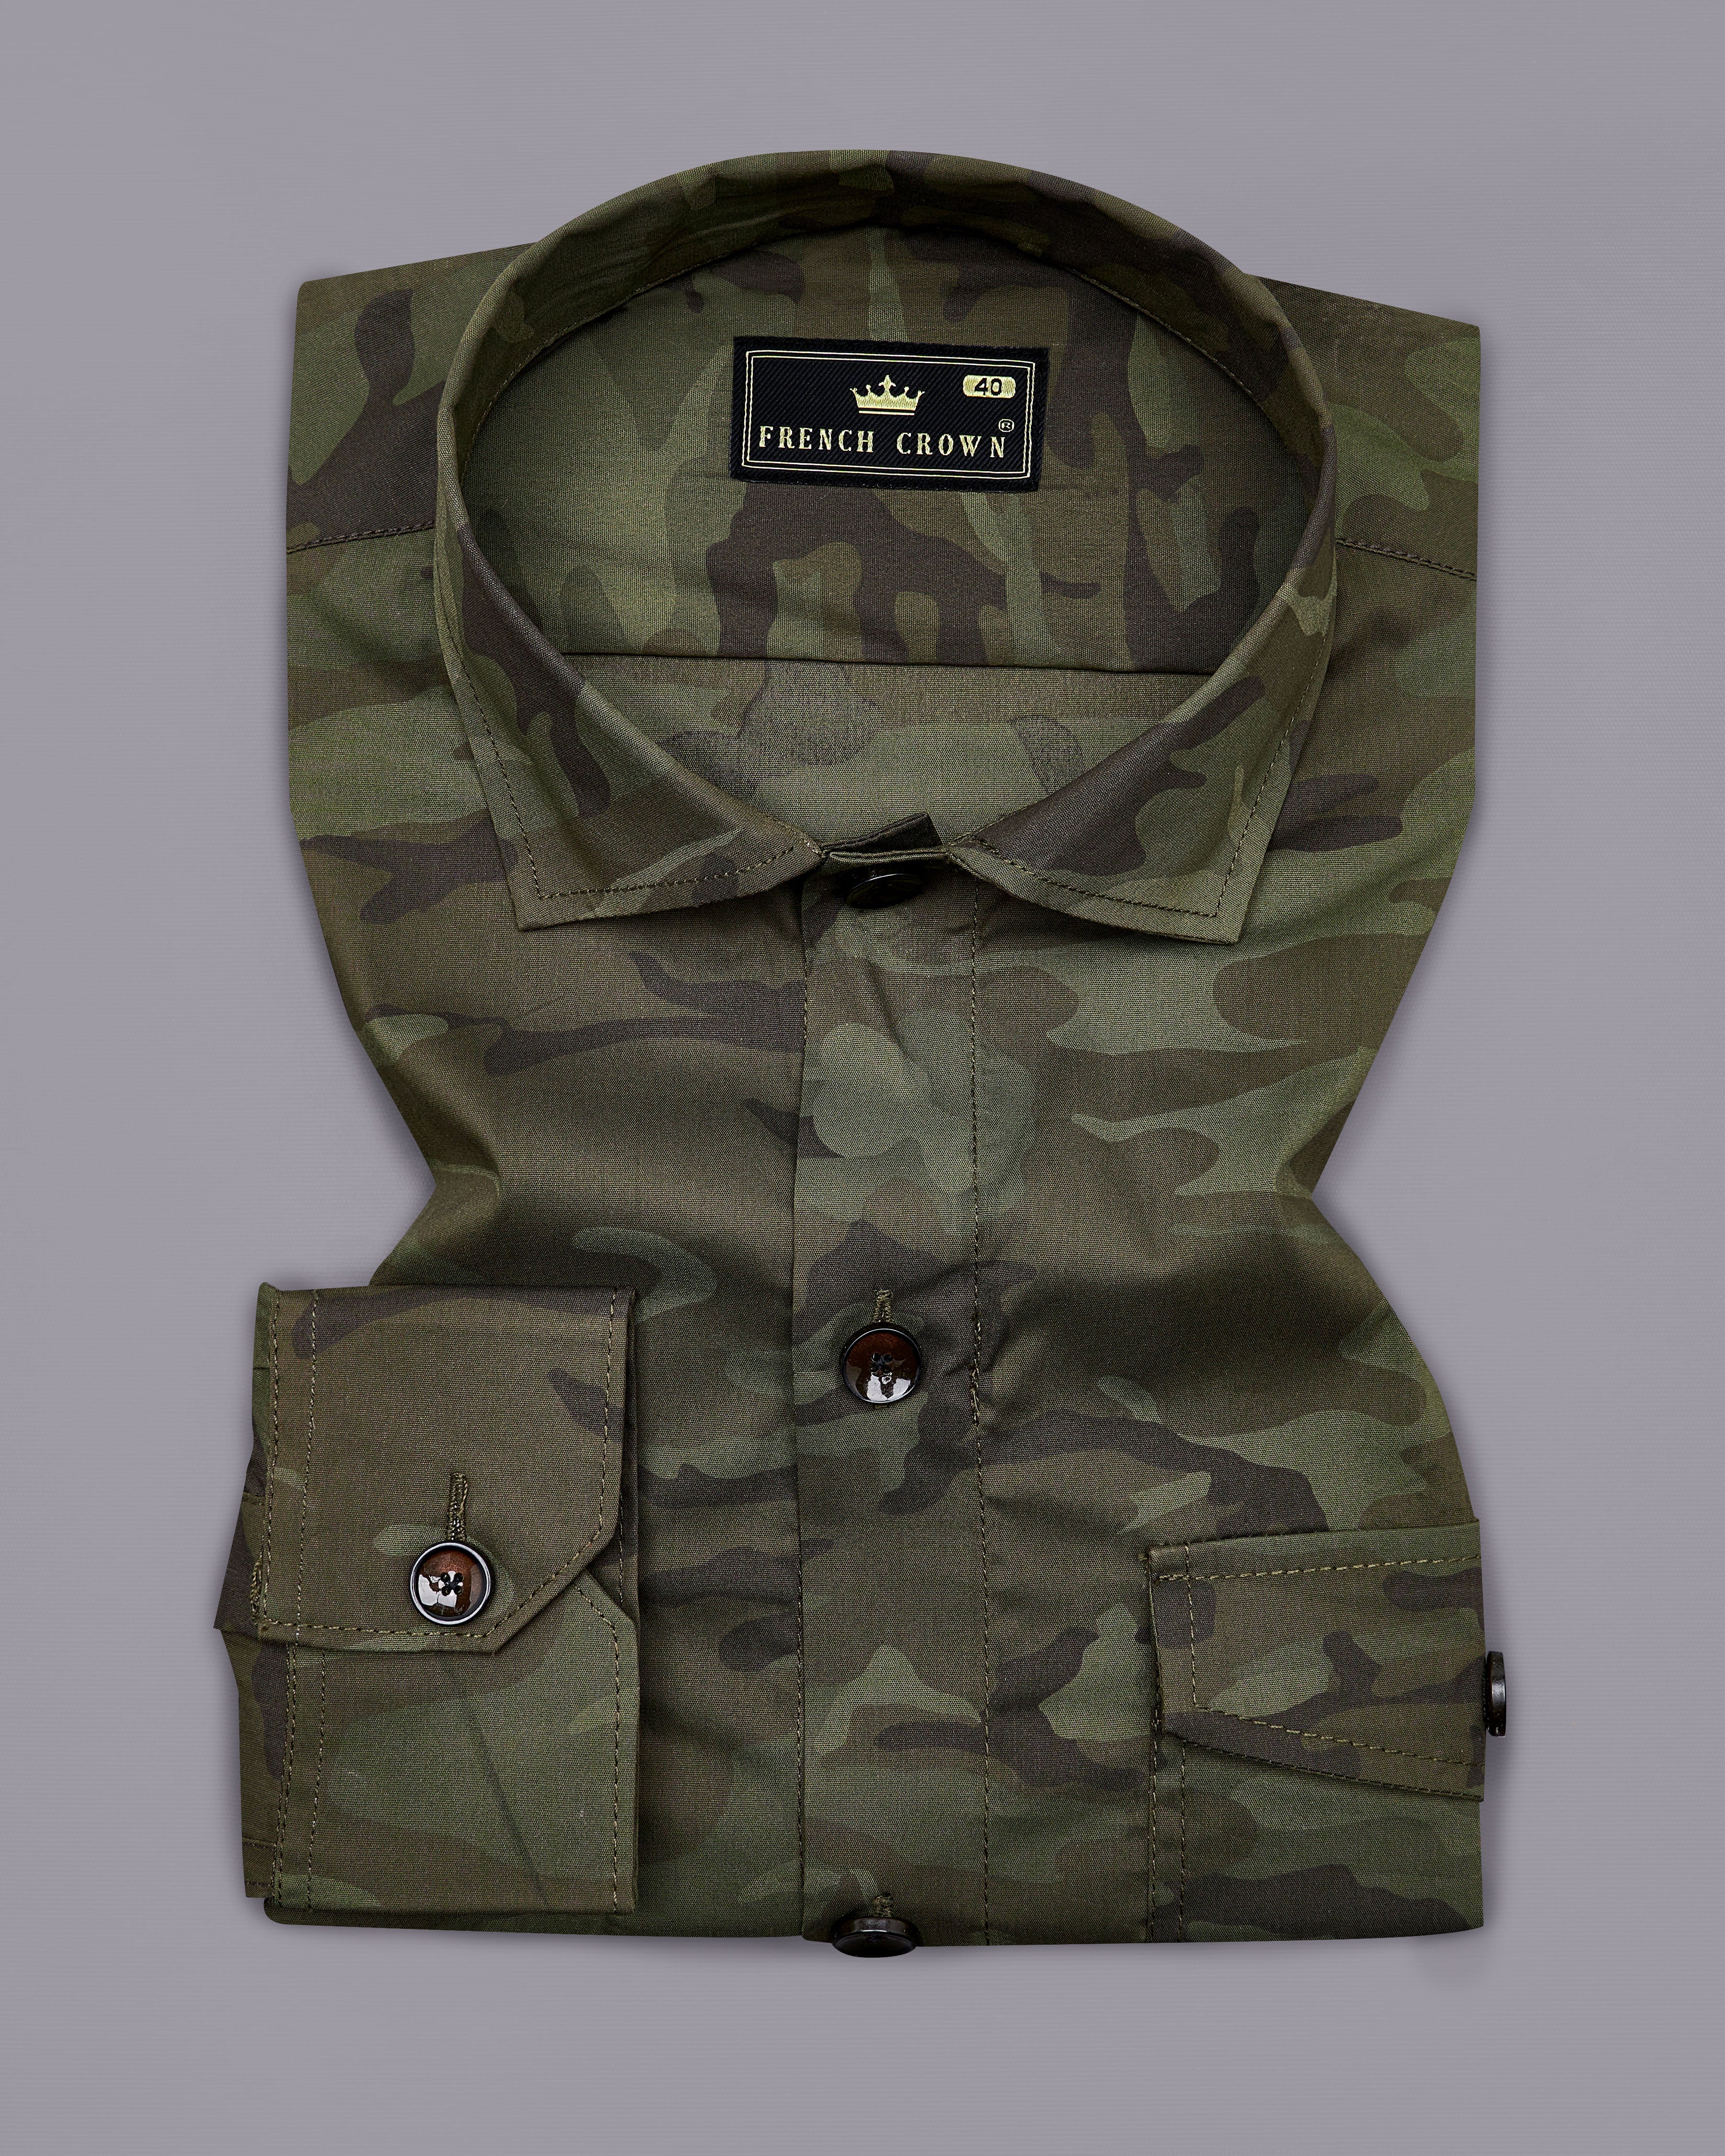 Rifle Green with Walnut Brown Camouflage Printed Royal Oxford Designer OverShirt 8900-CA-FP-P327-38, 8900-CA-FP-P327-H-38,  8900-CA-FP-P327-39,  8900-CA-FP-P327-H-39,  8900-CA-FP-P327-40,  8900-CA-FP-P327-H-40,  8900-CA-FP-P327-42,  8900-CA-FP-P327-H-42,  8900-CA-FP-P327-44,  8900-CA-FP-P327-H-44,  8900-CA-FP-P327-46,  8900-CA-FP-P327-H-46,  8900-CA-FP-P327-48,  8900-CA-FP-P327-H-48,  8900-CA-FP-P327-50,  8900-CA-FP-P327-H-50,  8900-CA-FP-P327-52,  8900-CA-FP-P327-H-52